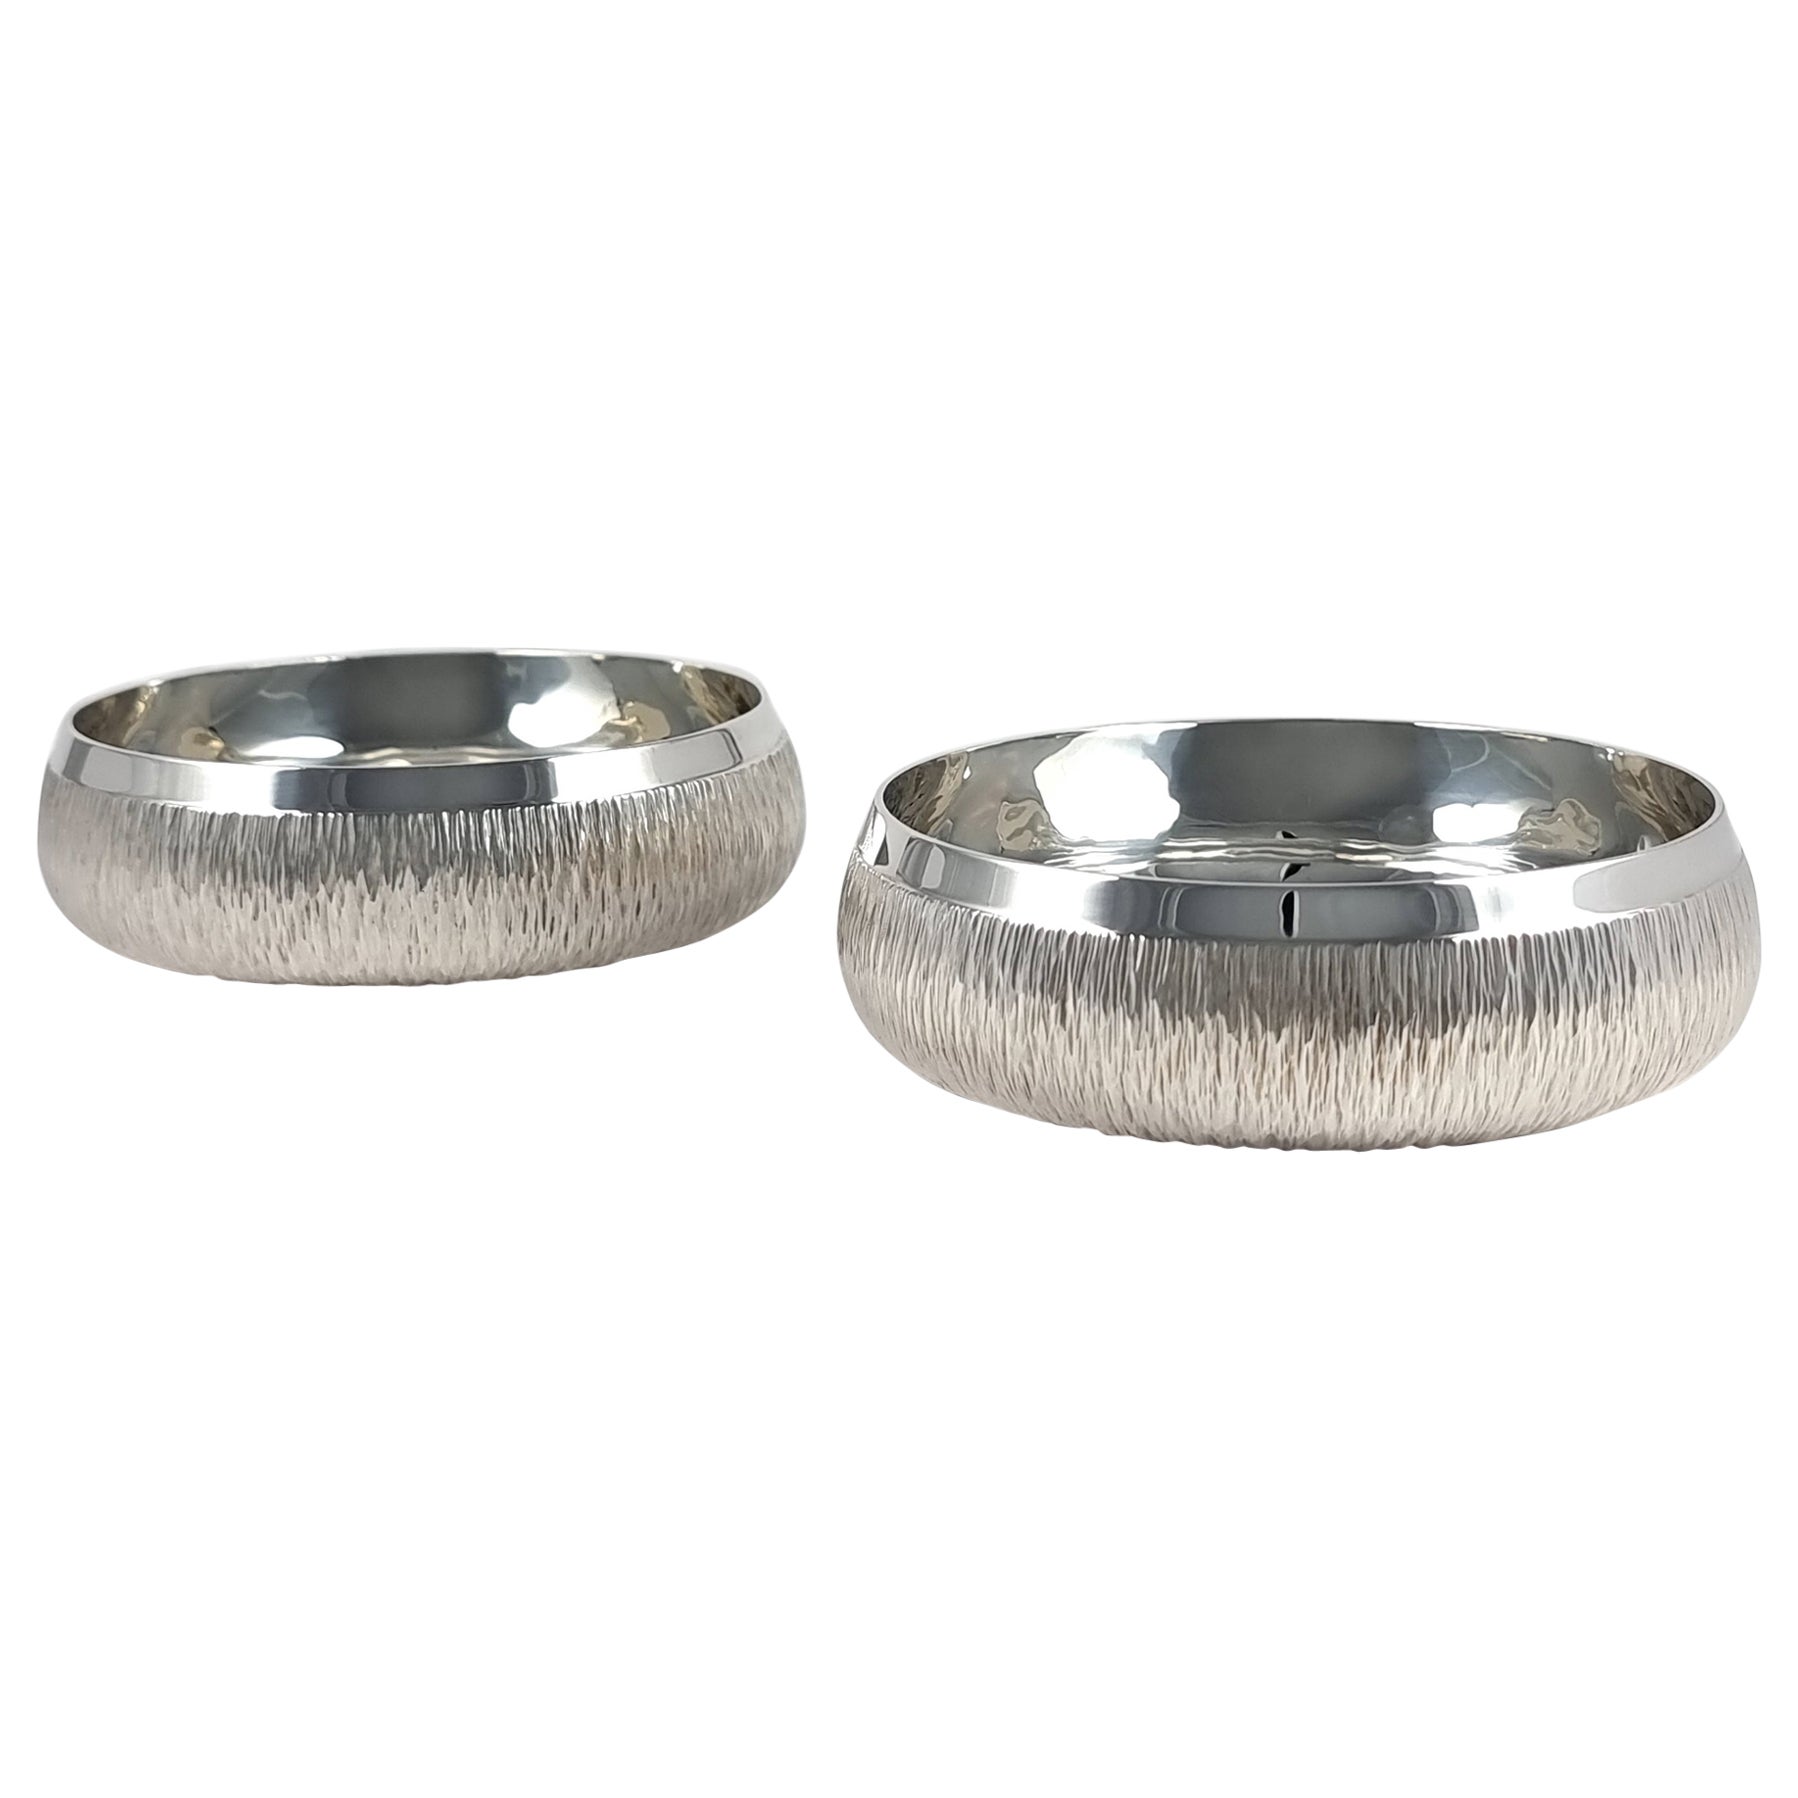 Pair of Sterling Silver Bowls, Gerald Benney, 1983